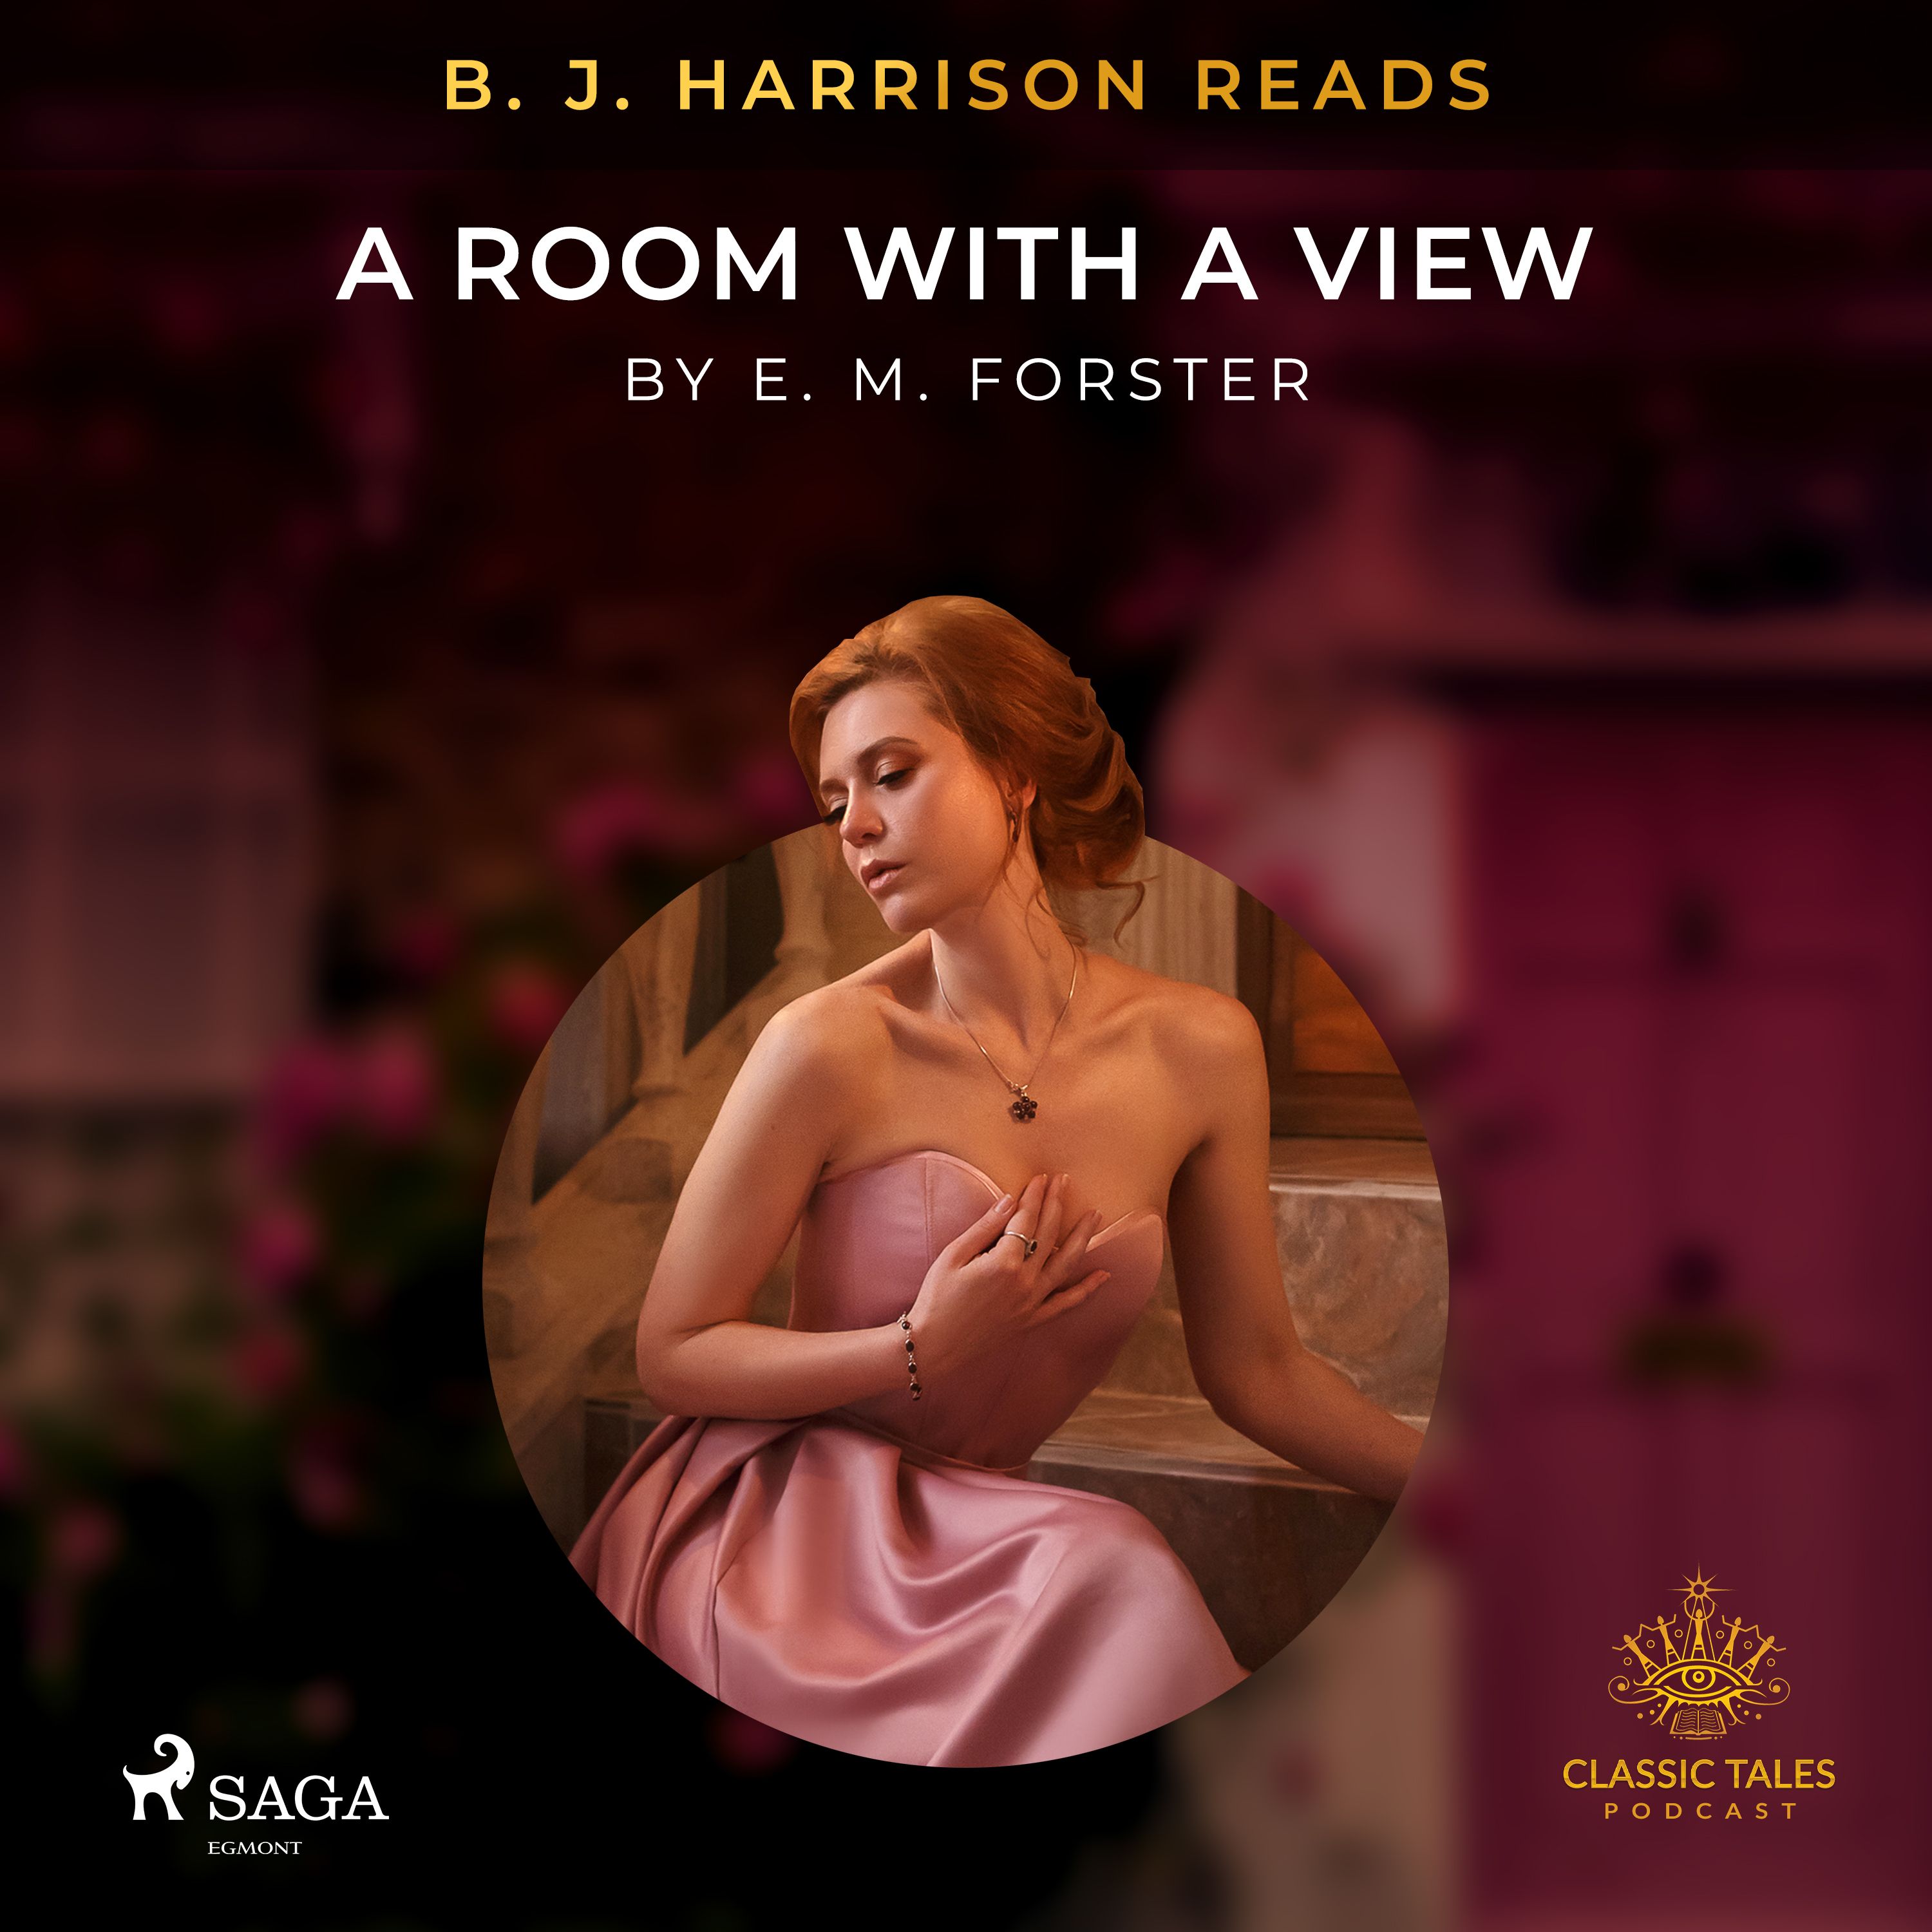 B. J. Harrison Reads A Room with a View, audiobook by E. M. Forster